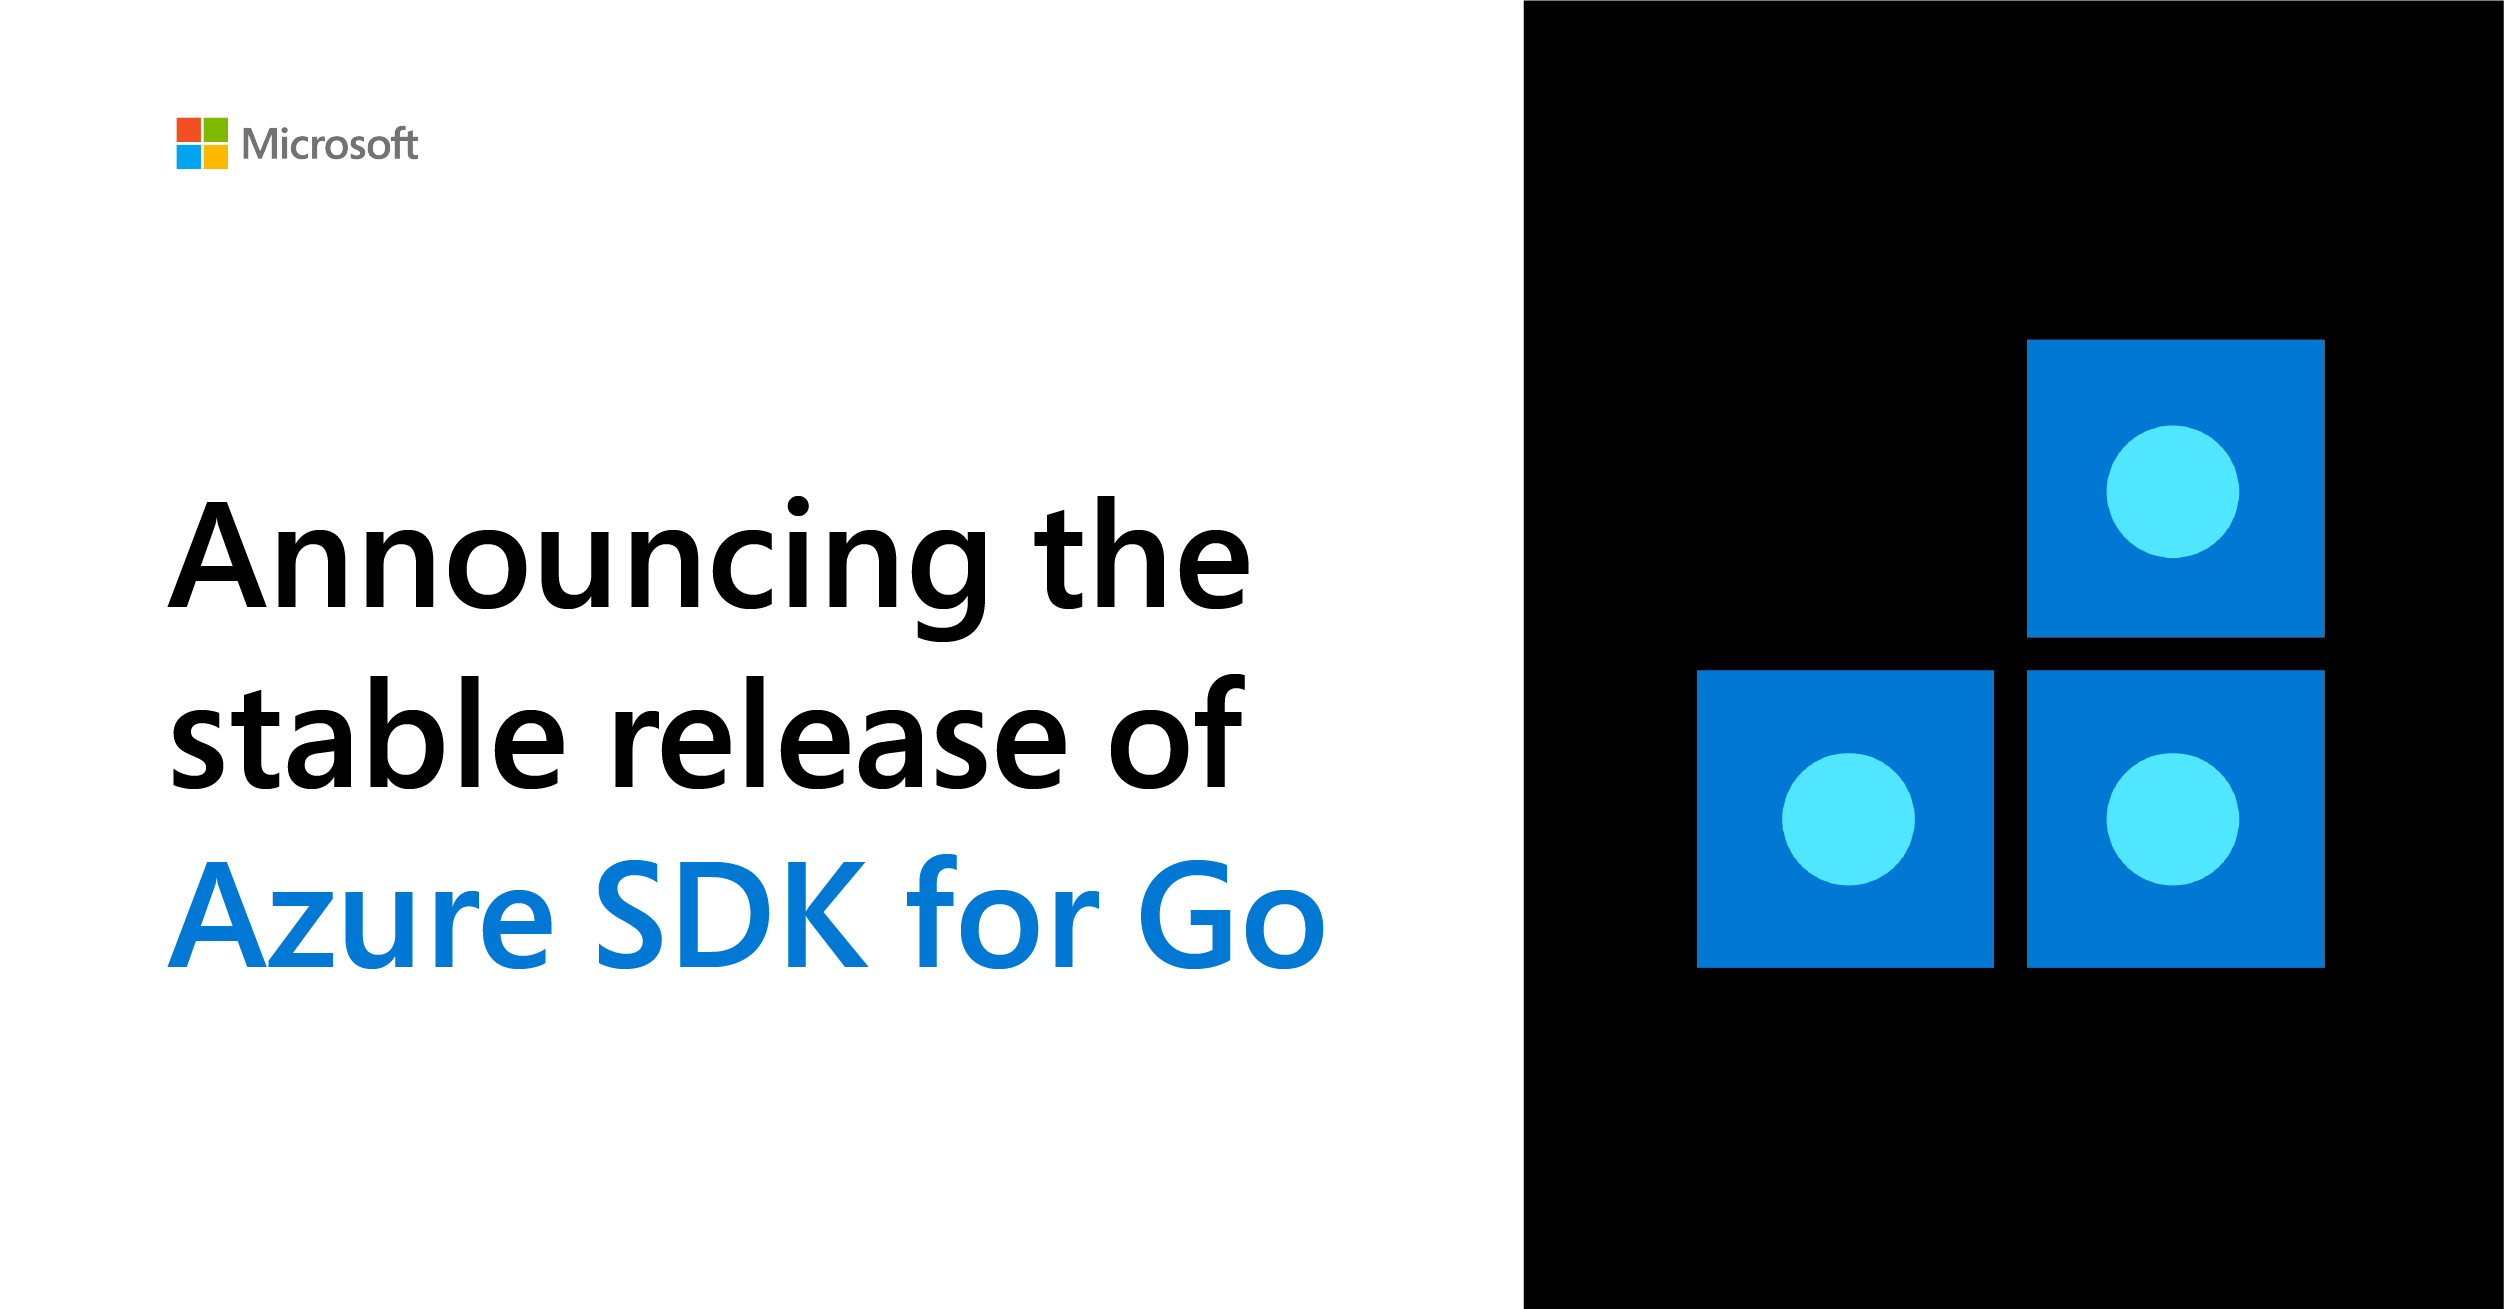 Announcing the stable release of the Azure SDK for Go